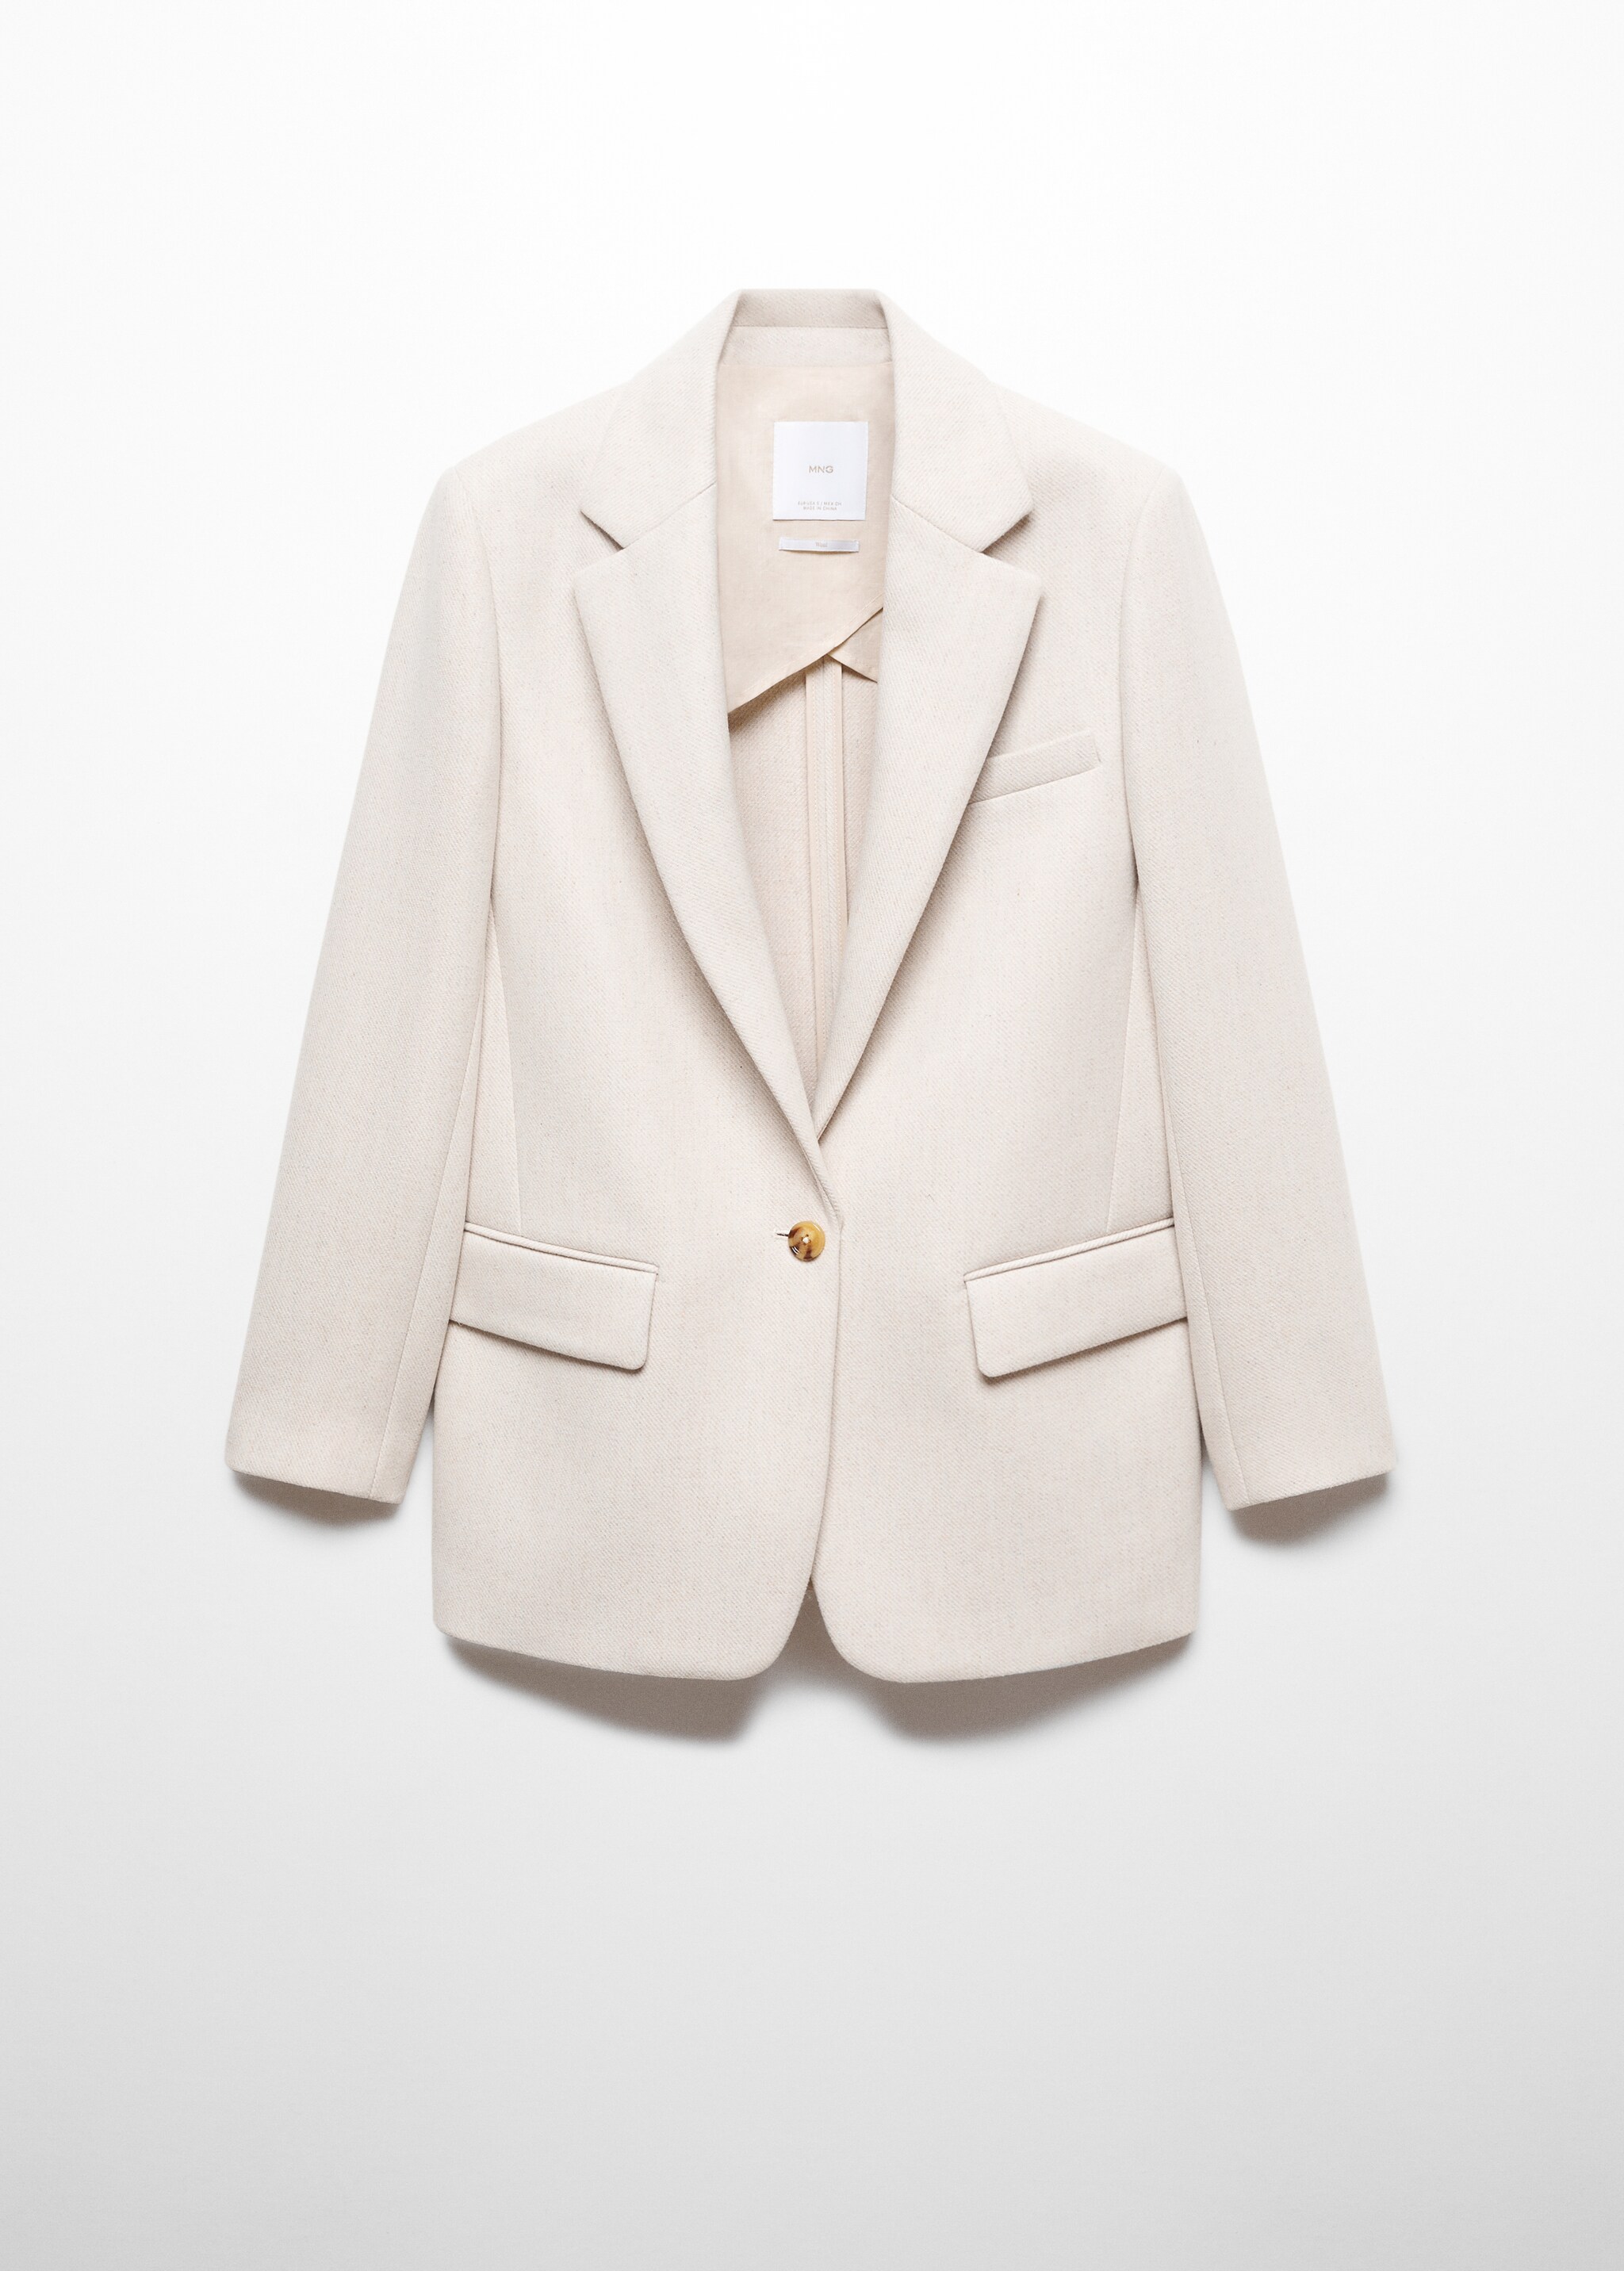 Structured wool blazer - Article without model